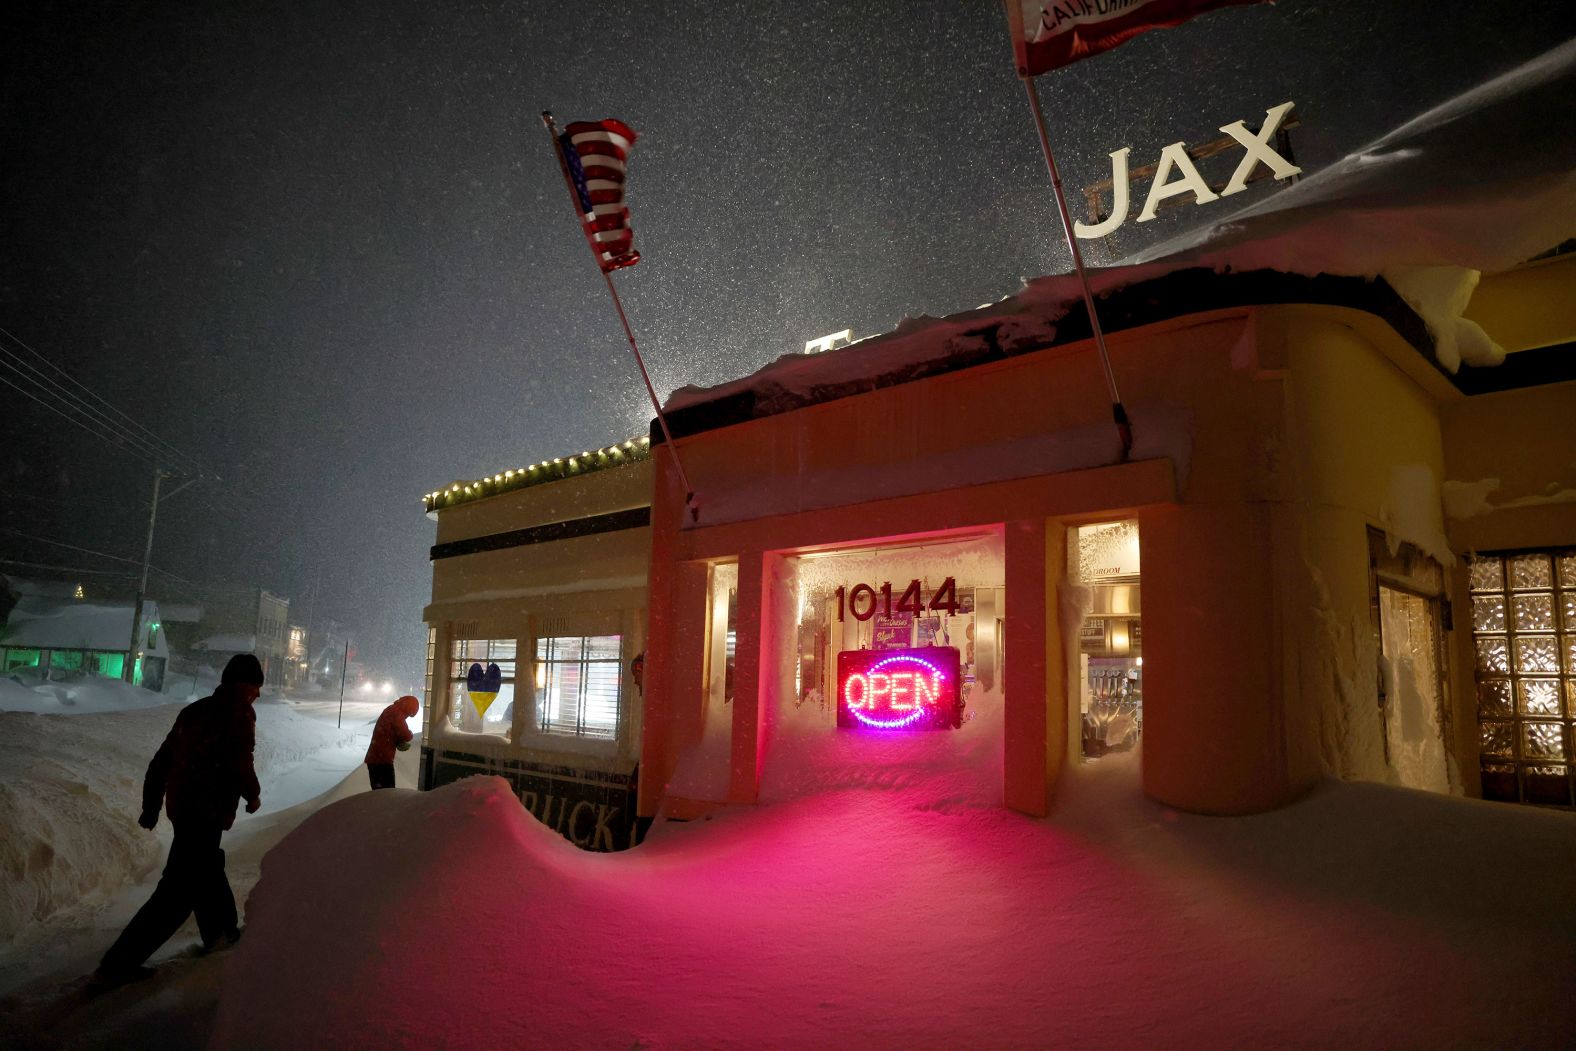 Patrons enter the Jax At The Tracks diner in Truckee, California, on Sunday, March 3. California's mountain towns and ski resorts were slammed by a <a href="index.php?page=&url=https%3A%2F%2Fwww.cnn.com%2F2024%2F03%2F04%2Fweather%2Fcalifornia-snow-storm-totals-monday%2Findex.html" target="_blank">blockbuster blizzard</a>.